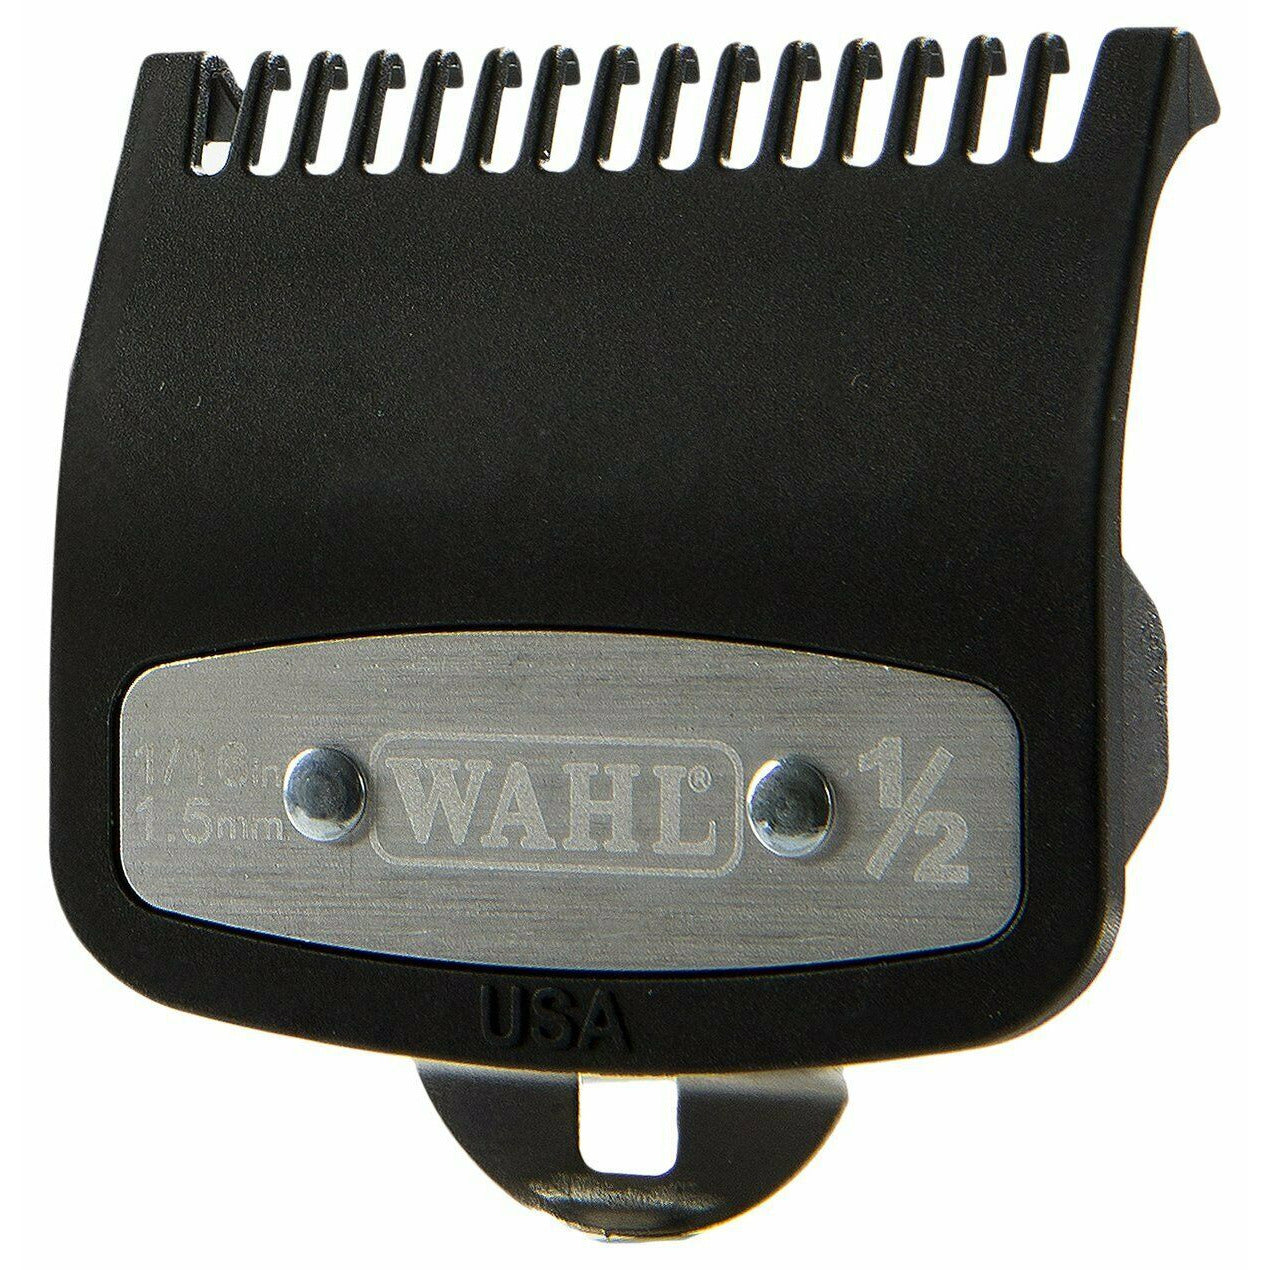 Wahl 3354-1000 #1/2 Premium Cutting Guide With Metal Clip 1/16" 1.5MM